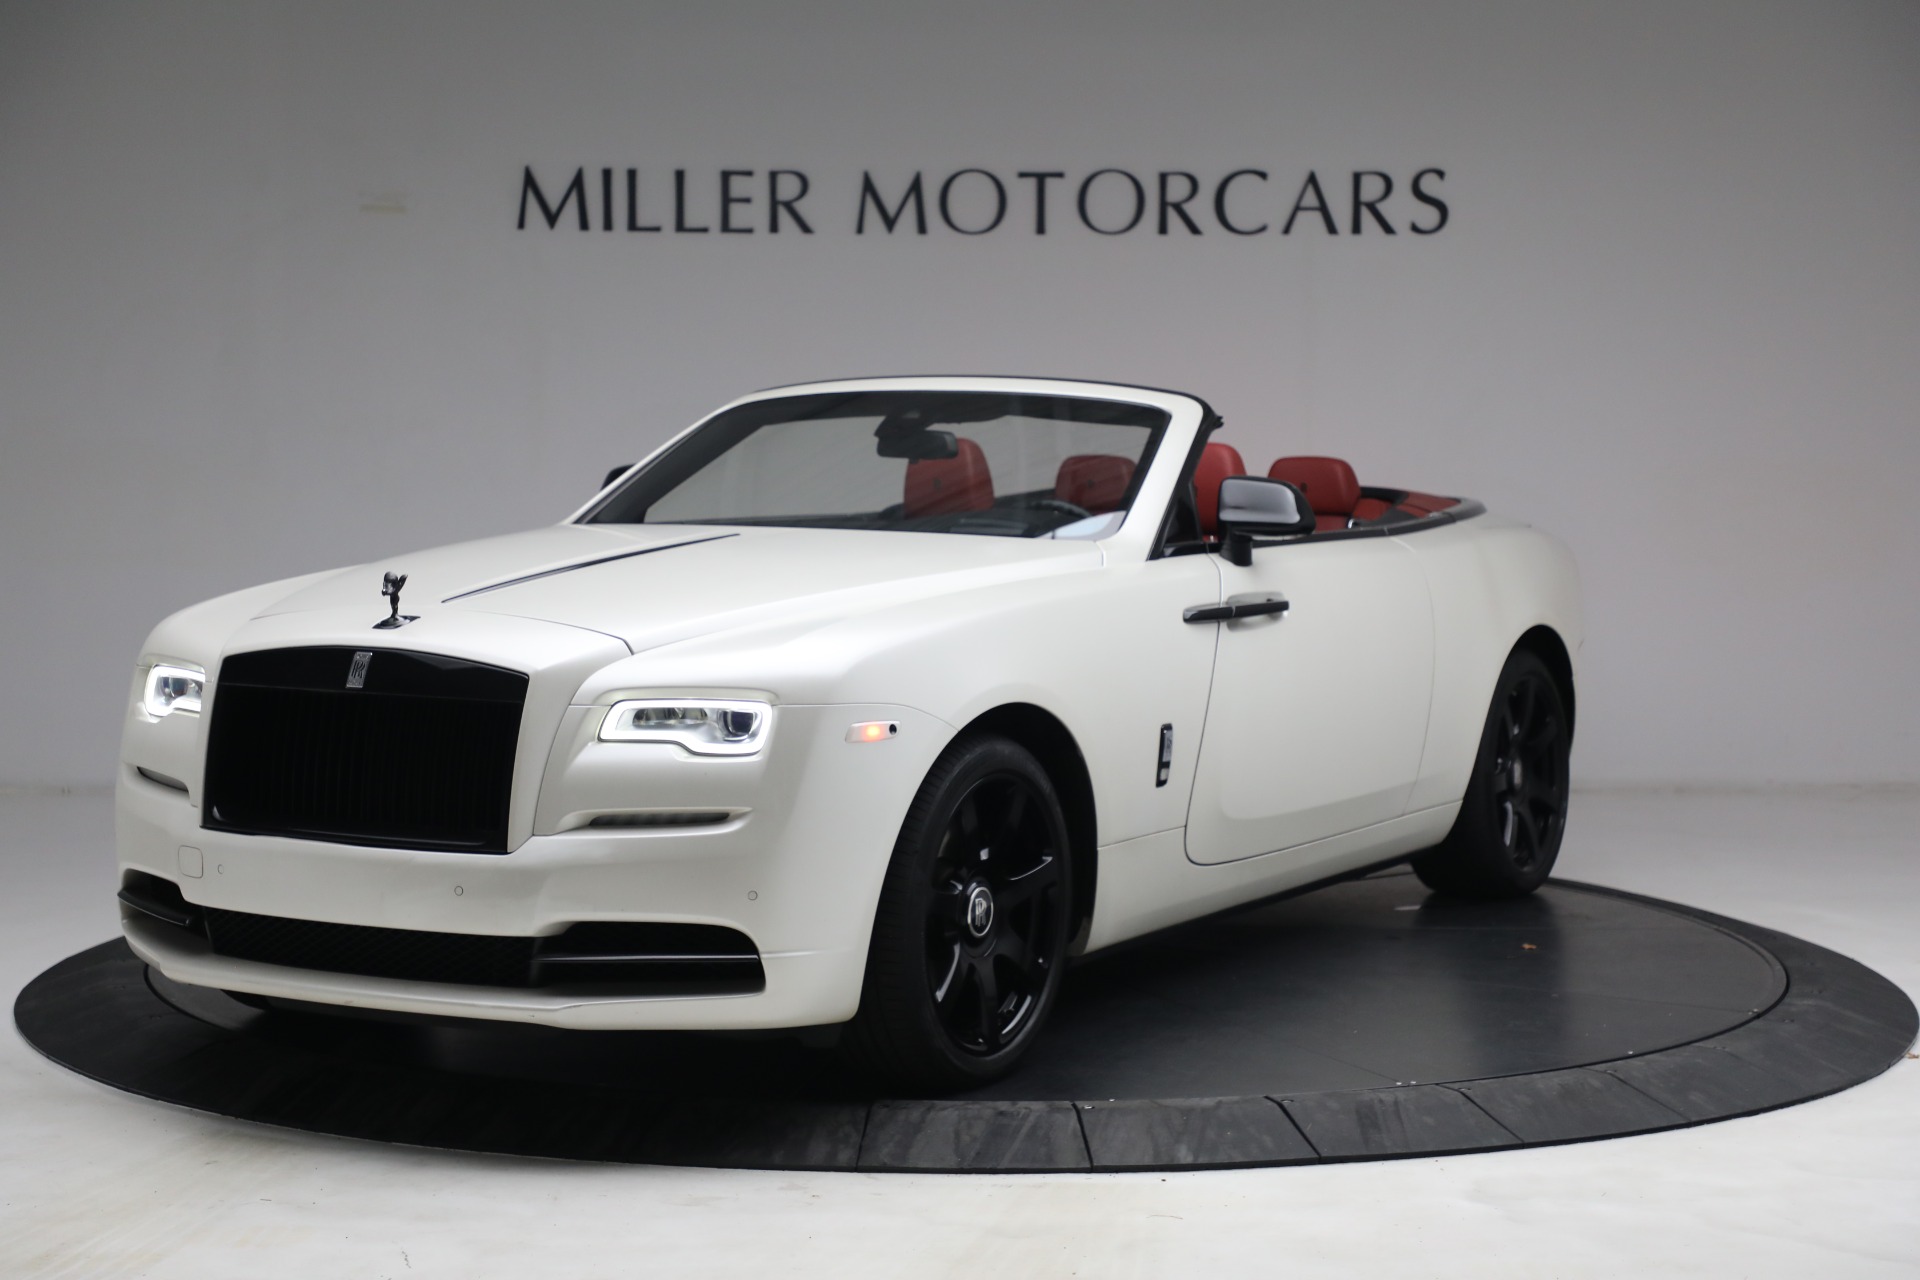 Used 2017 Rolls-Royce Dawn for sale Sold at Pagani of Greenwich in Greenwich CT 06830 1